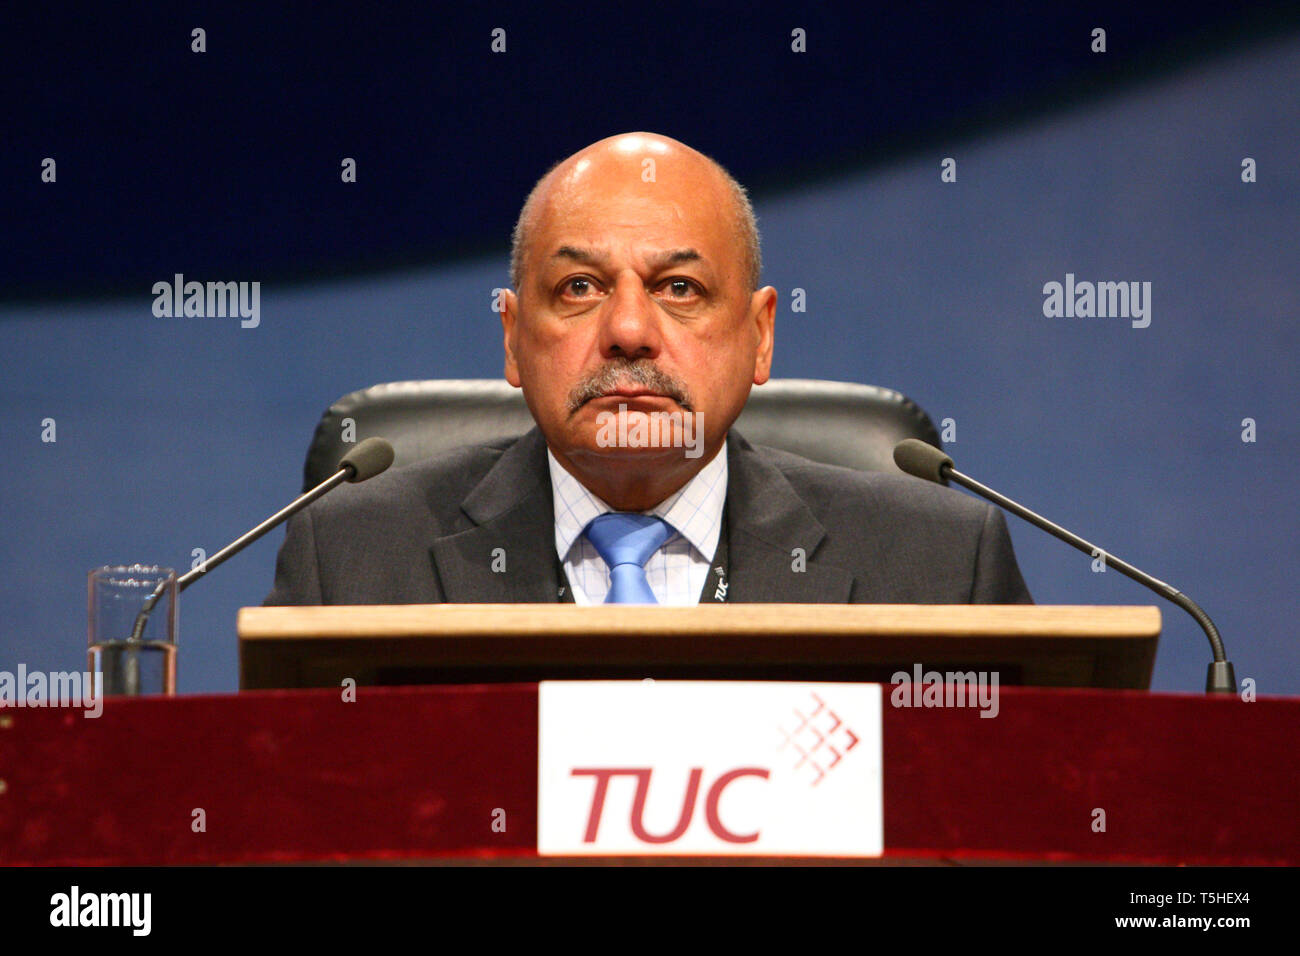 Dougie Rooney. TUC Conference, Manchester. 13 September 2010. Stock Photo